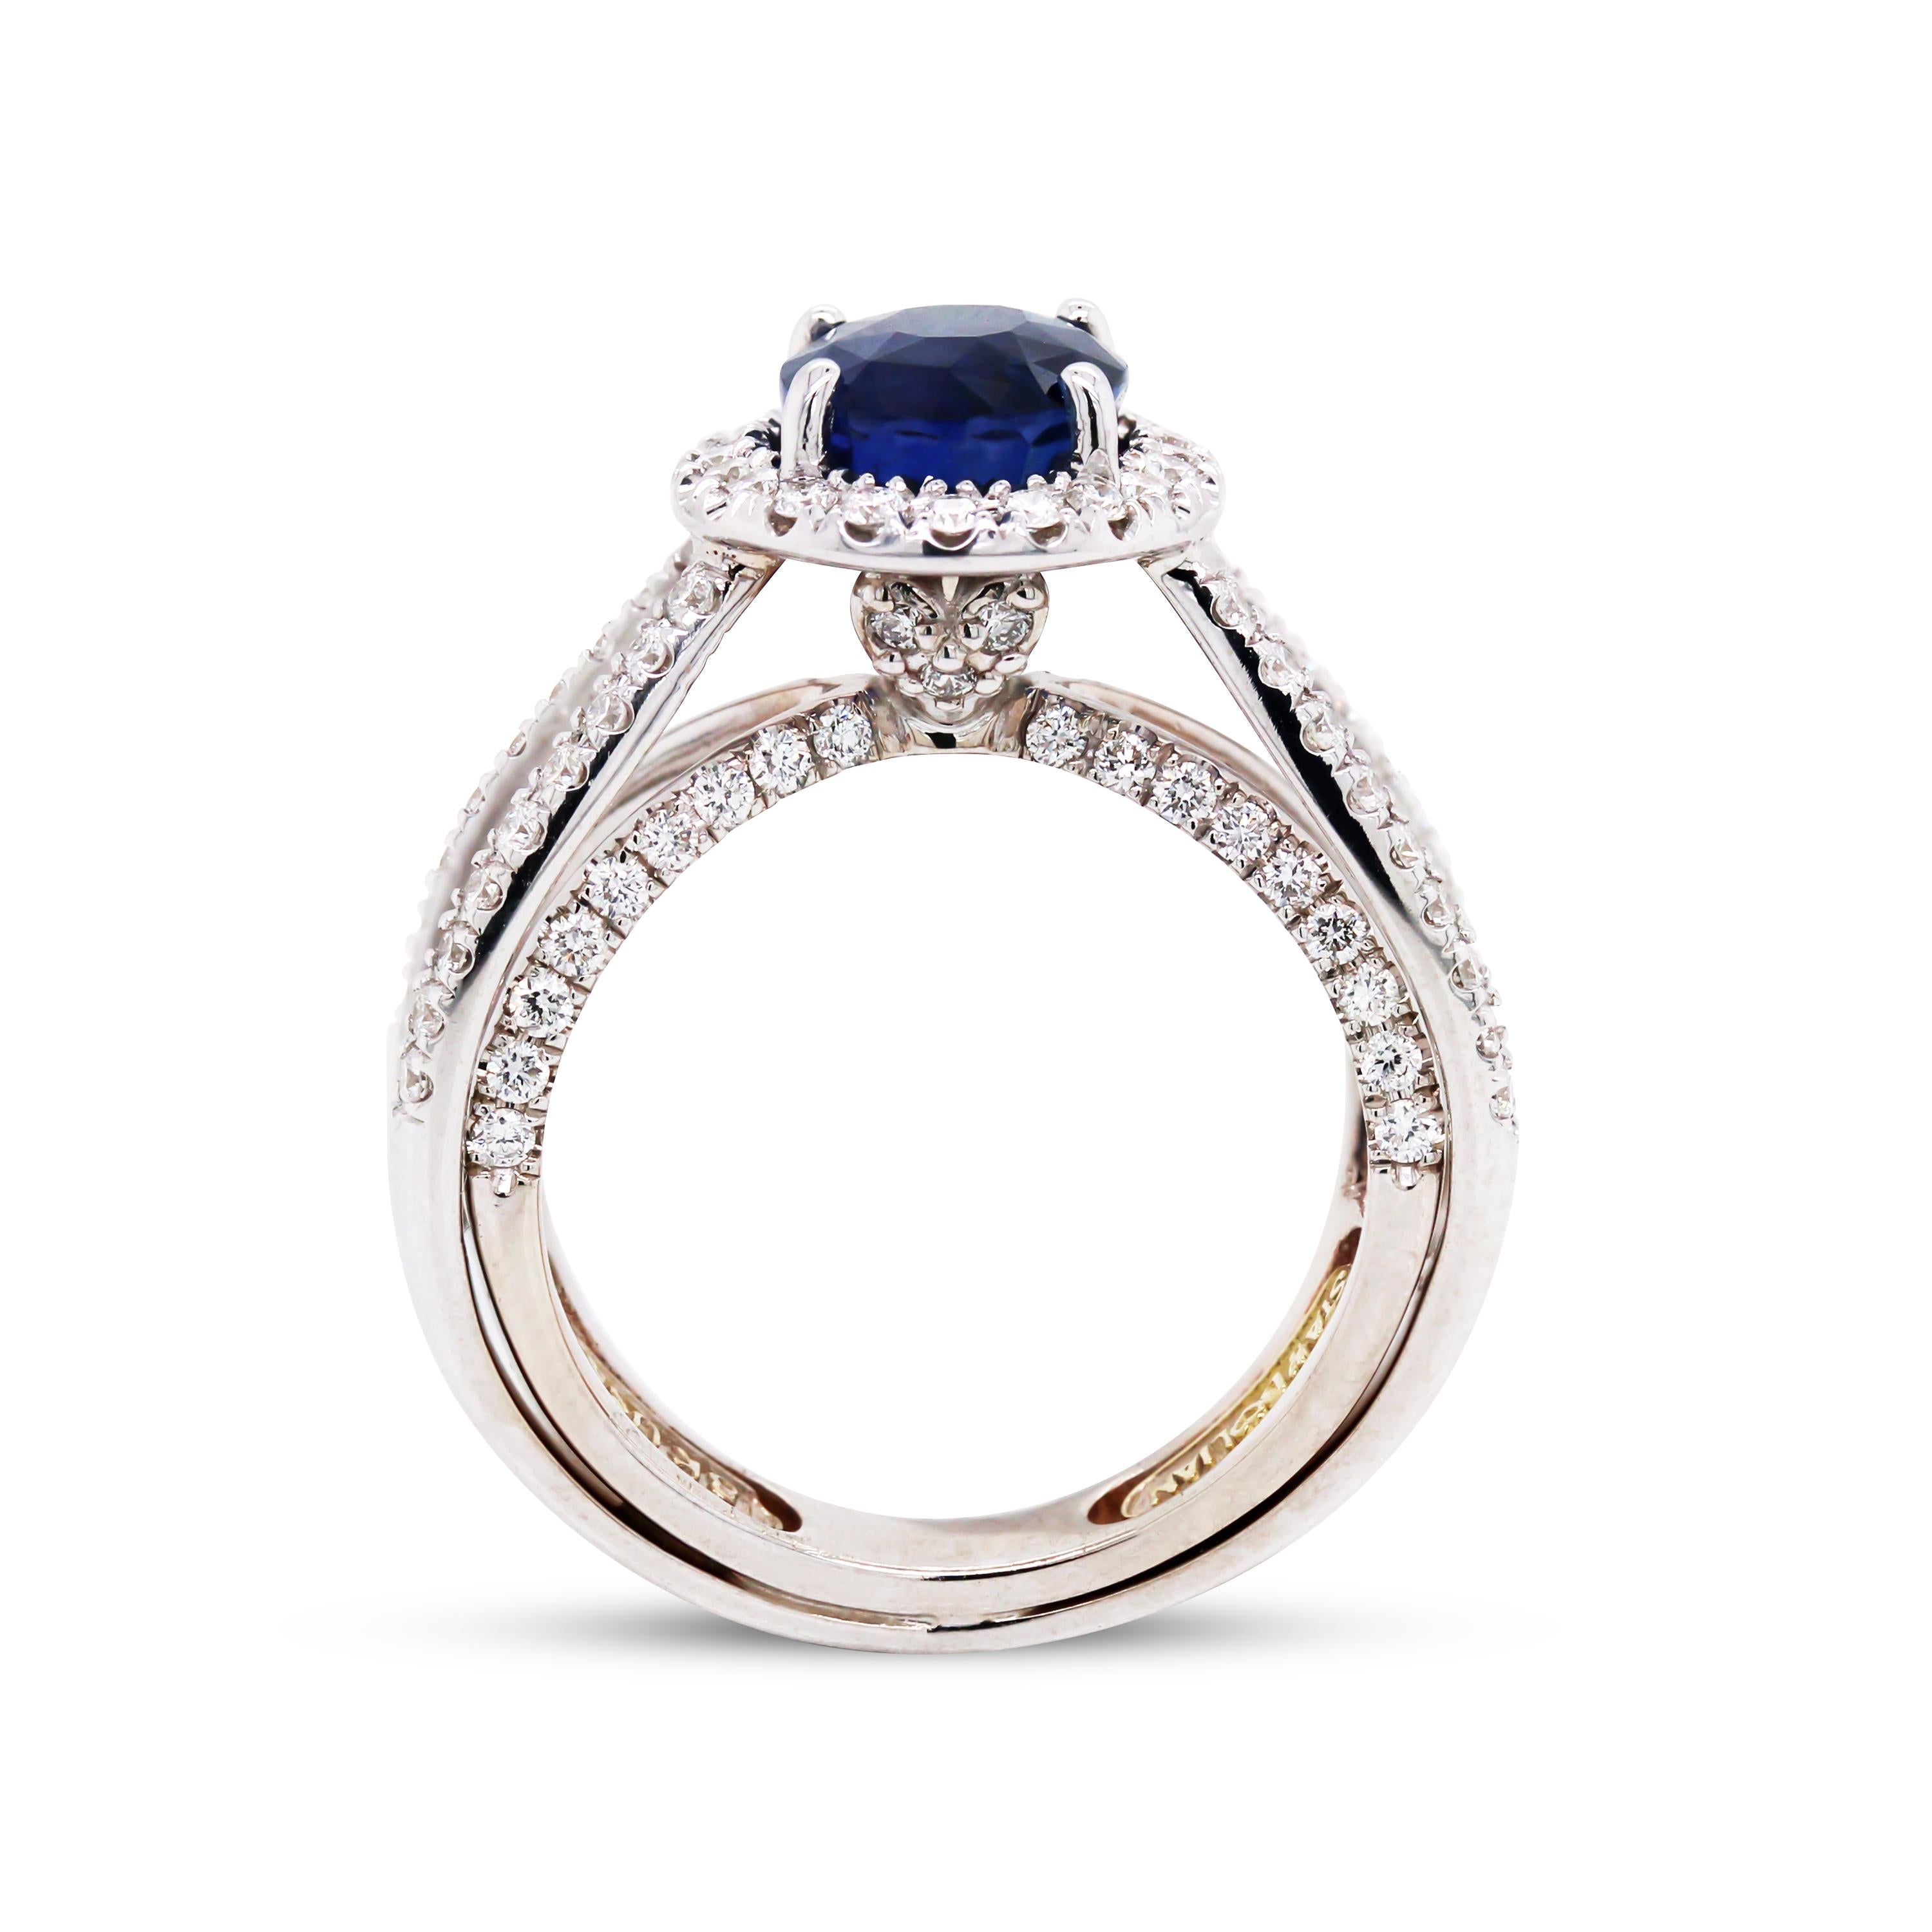 Oval Cut Stambolian 3.48 Carat Oval Blue Sapphire 18K White Gold Diamond Cocktail Ring